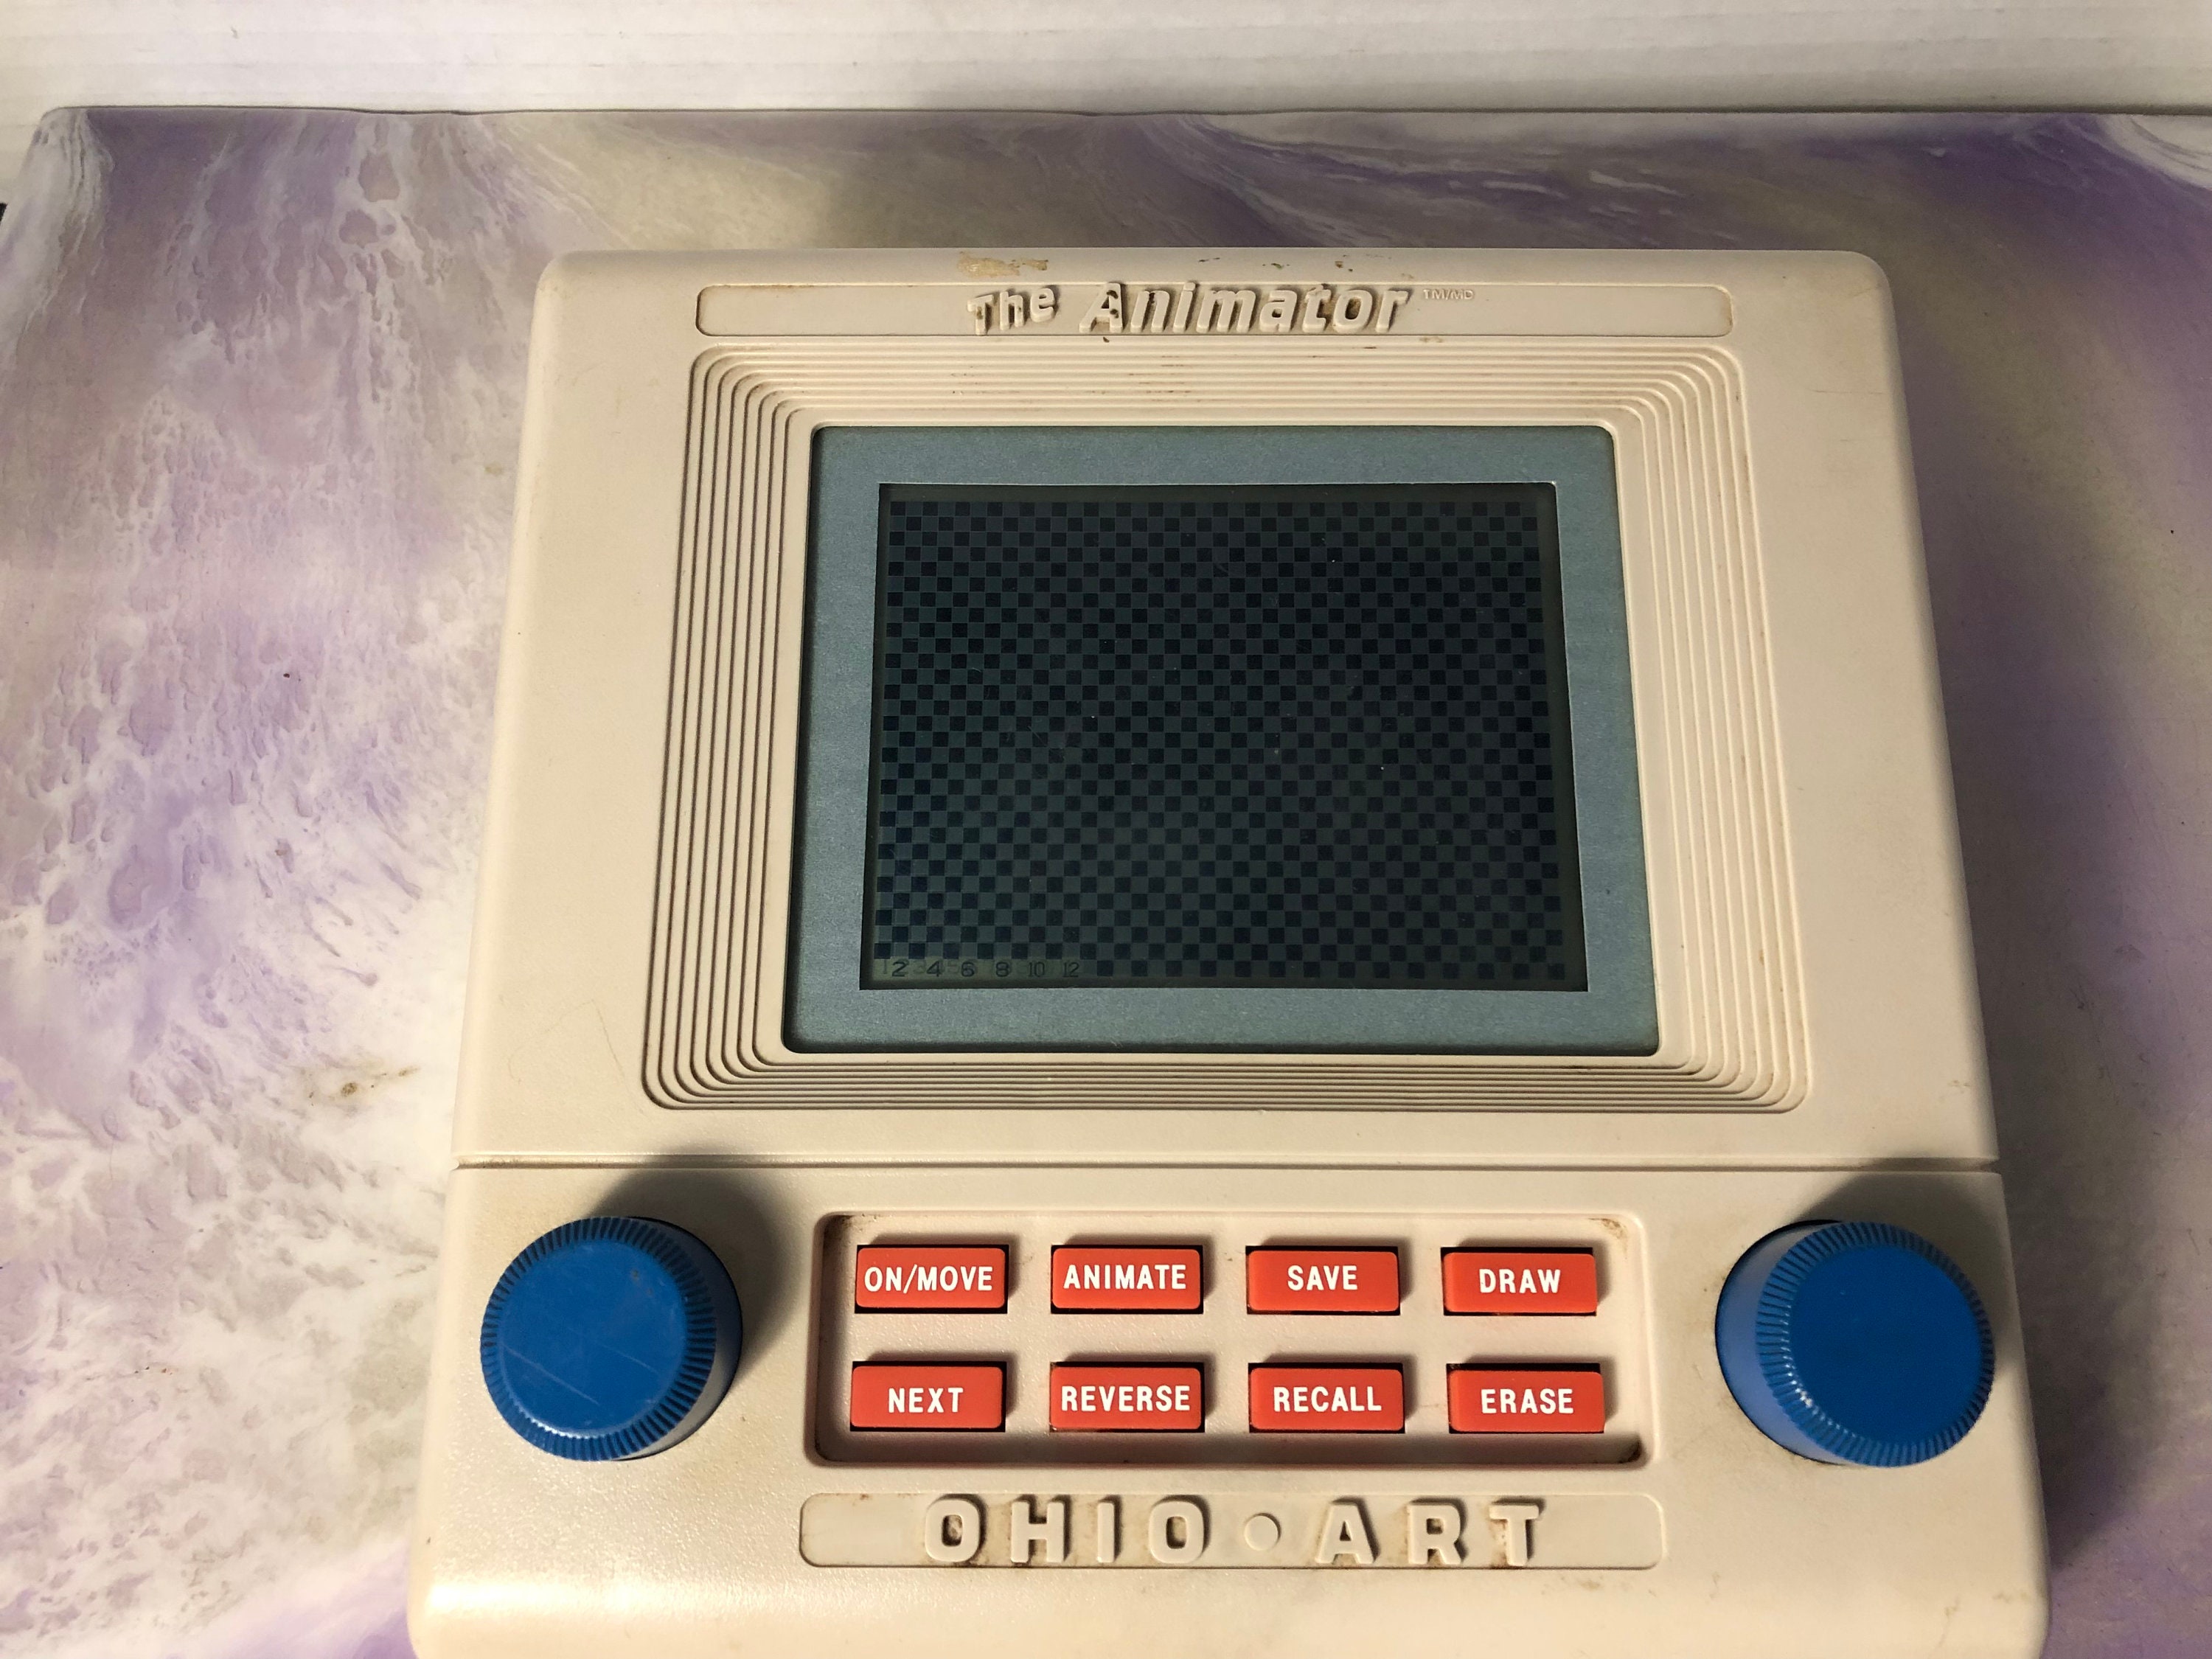 Disappointing Gifts, 1986 Edition: The Etch A Sketch Animator | TechCrunch